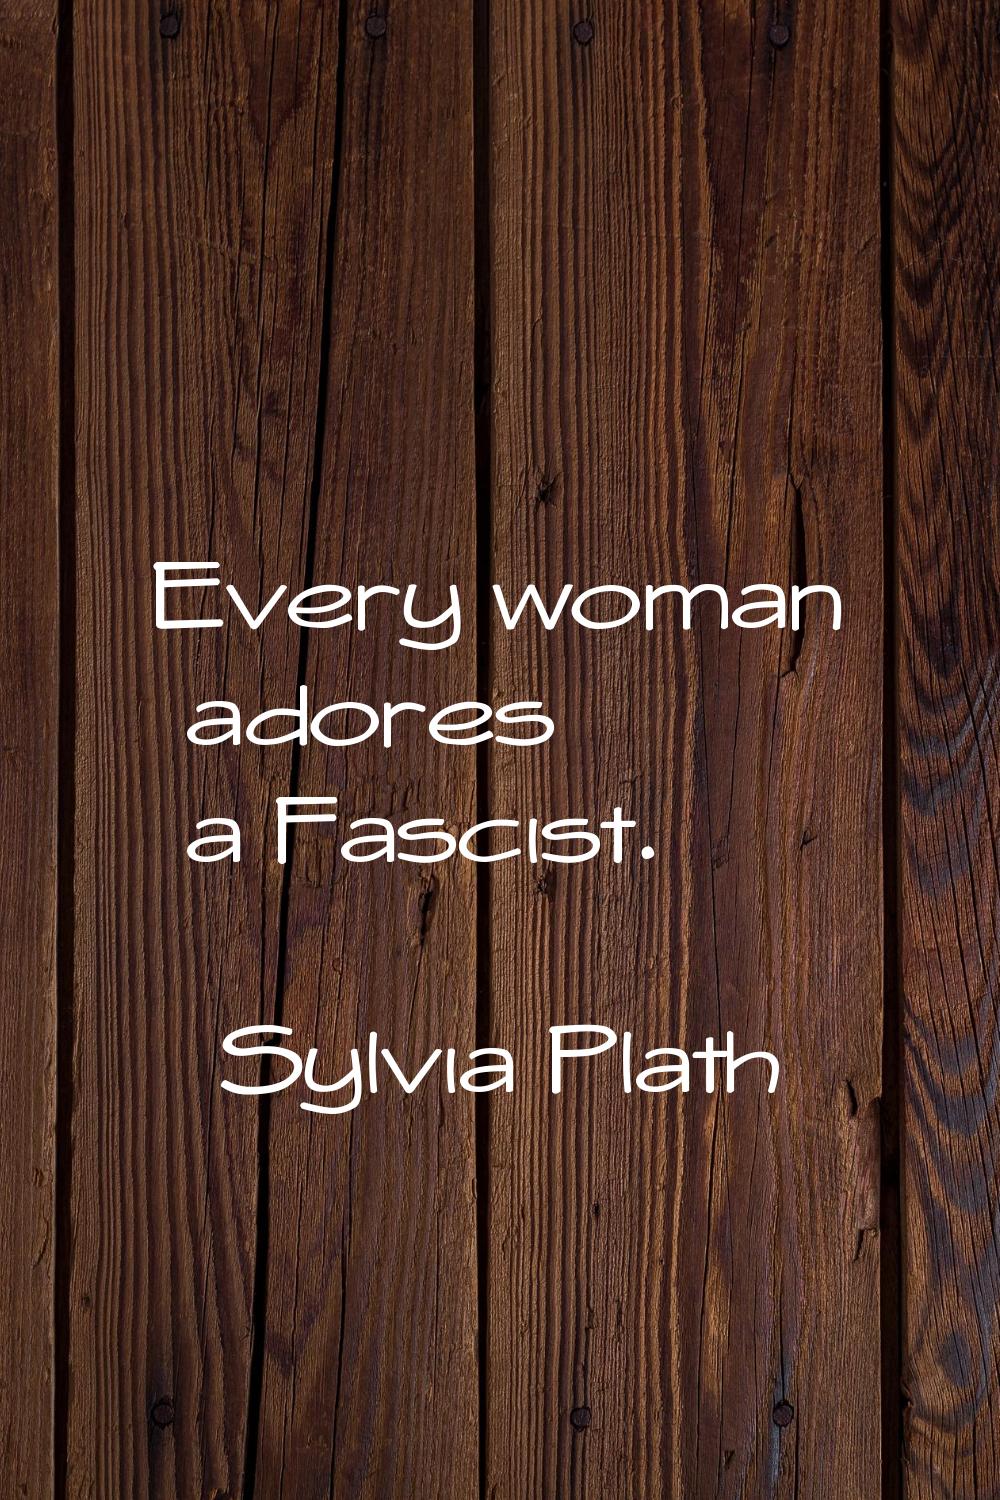 Every woman adores a Fascist.